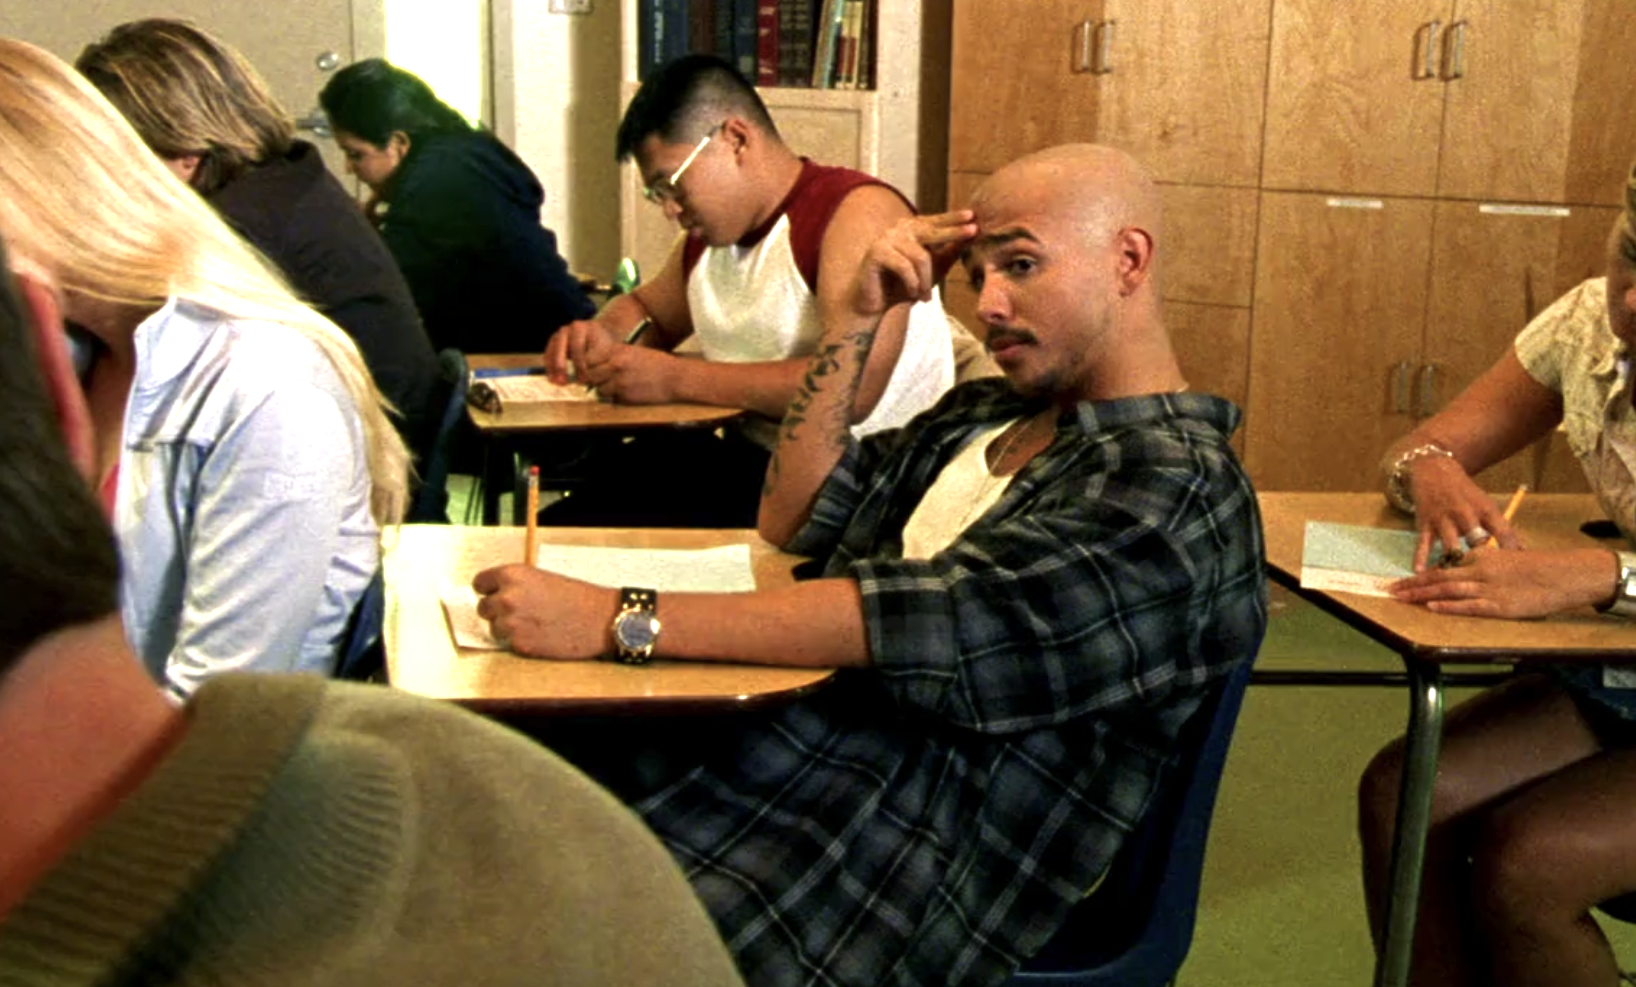 Screenshot from Veronica Mars S1E7. Weevil is sitting in a classroom. He's holding a pencil in his left hand and his hand is resting on a paper on his desk. His right hand is on his forehead and his head is tilted up and he's looking at a desk in the row next to him. He's surrounded by other students taking the test at their own desks.